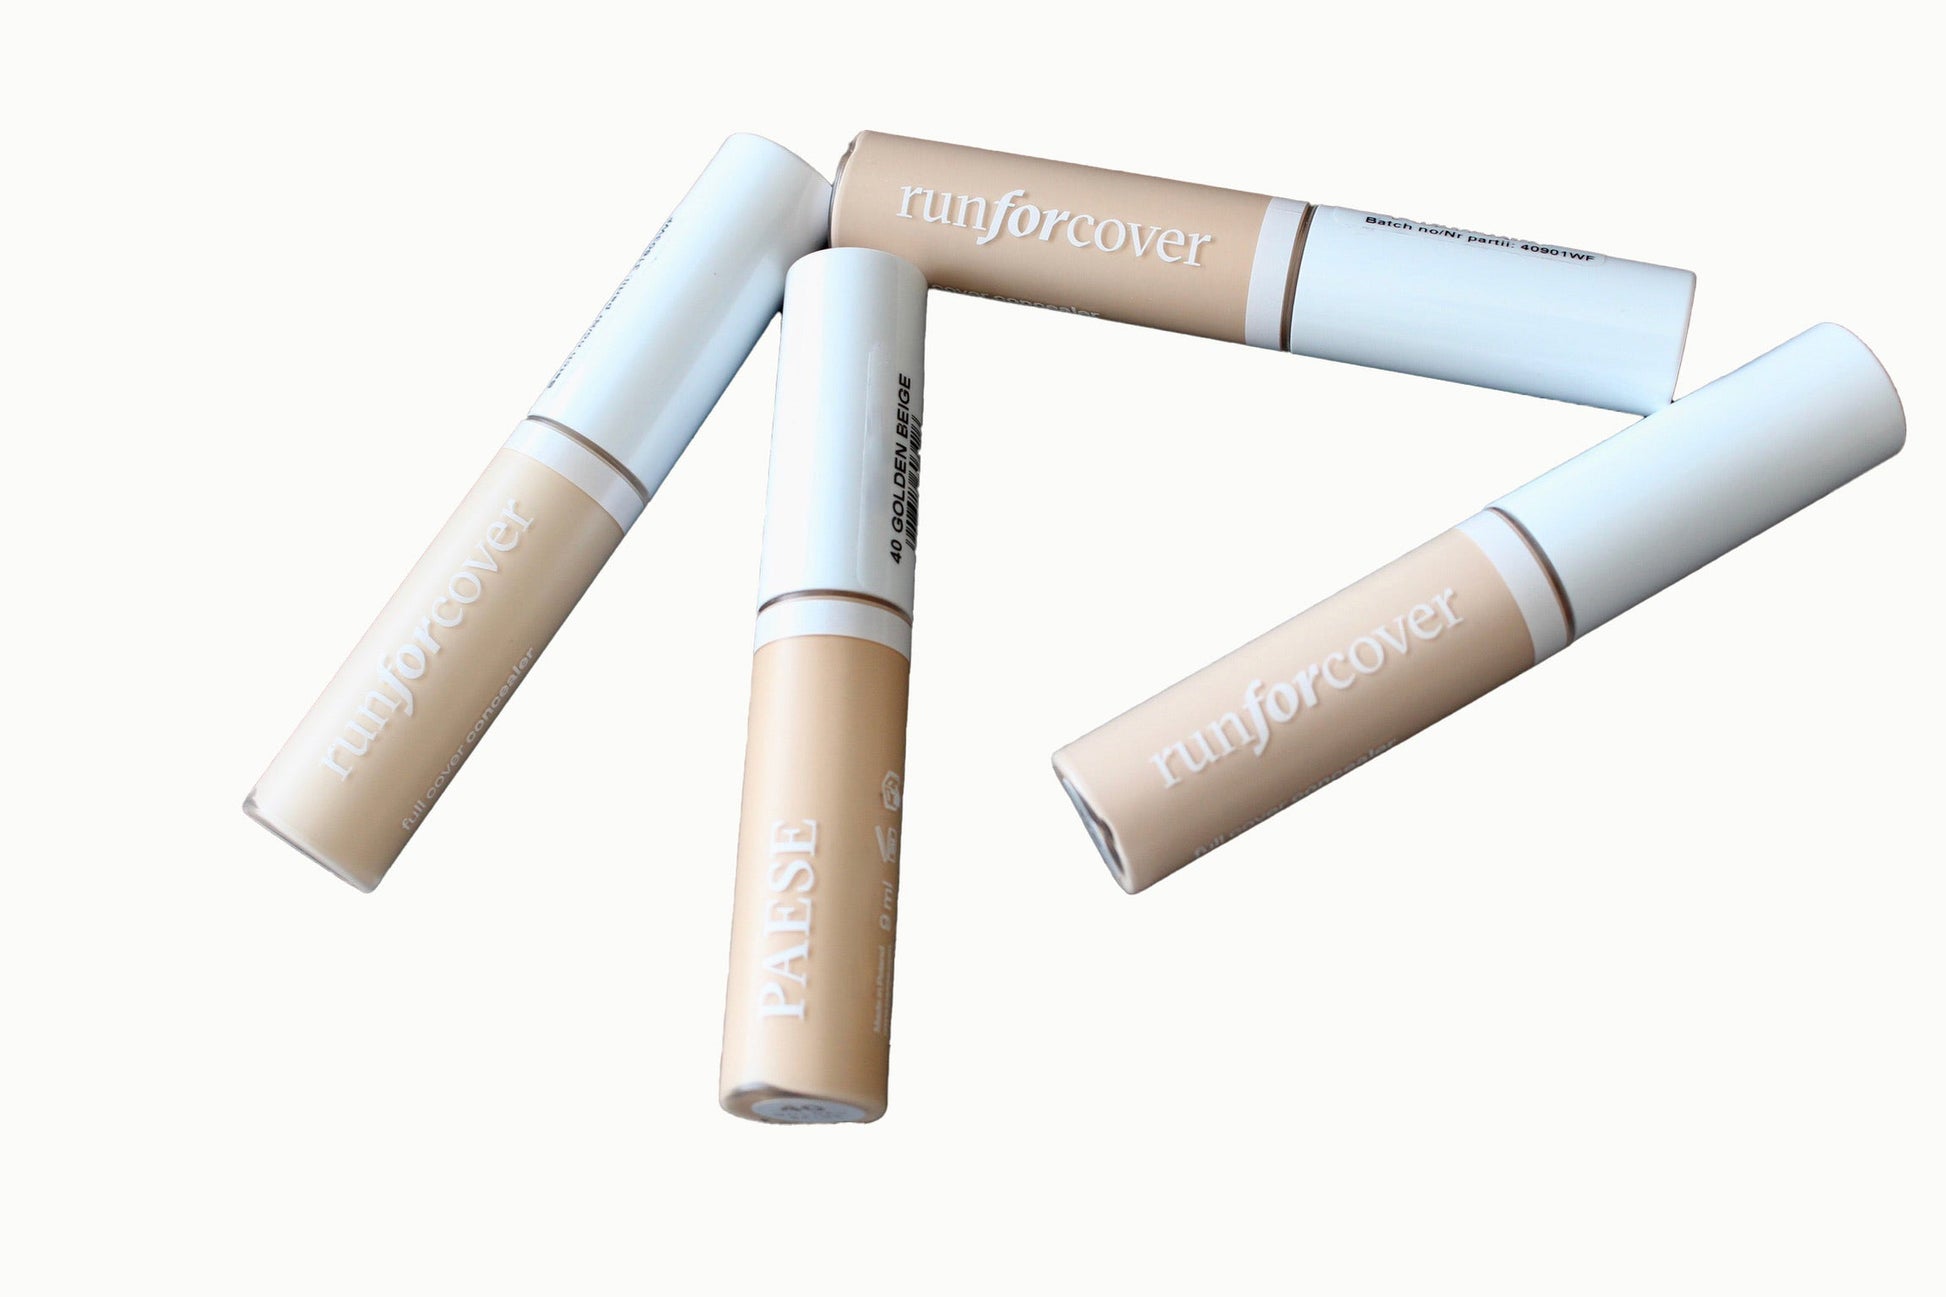 Paese | Run for Cover Full Cover Concealer